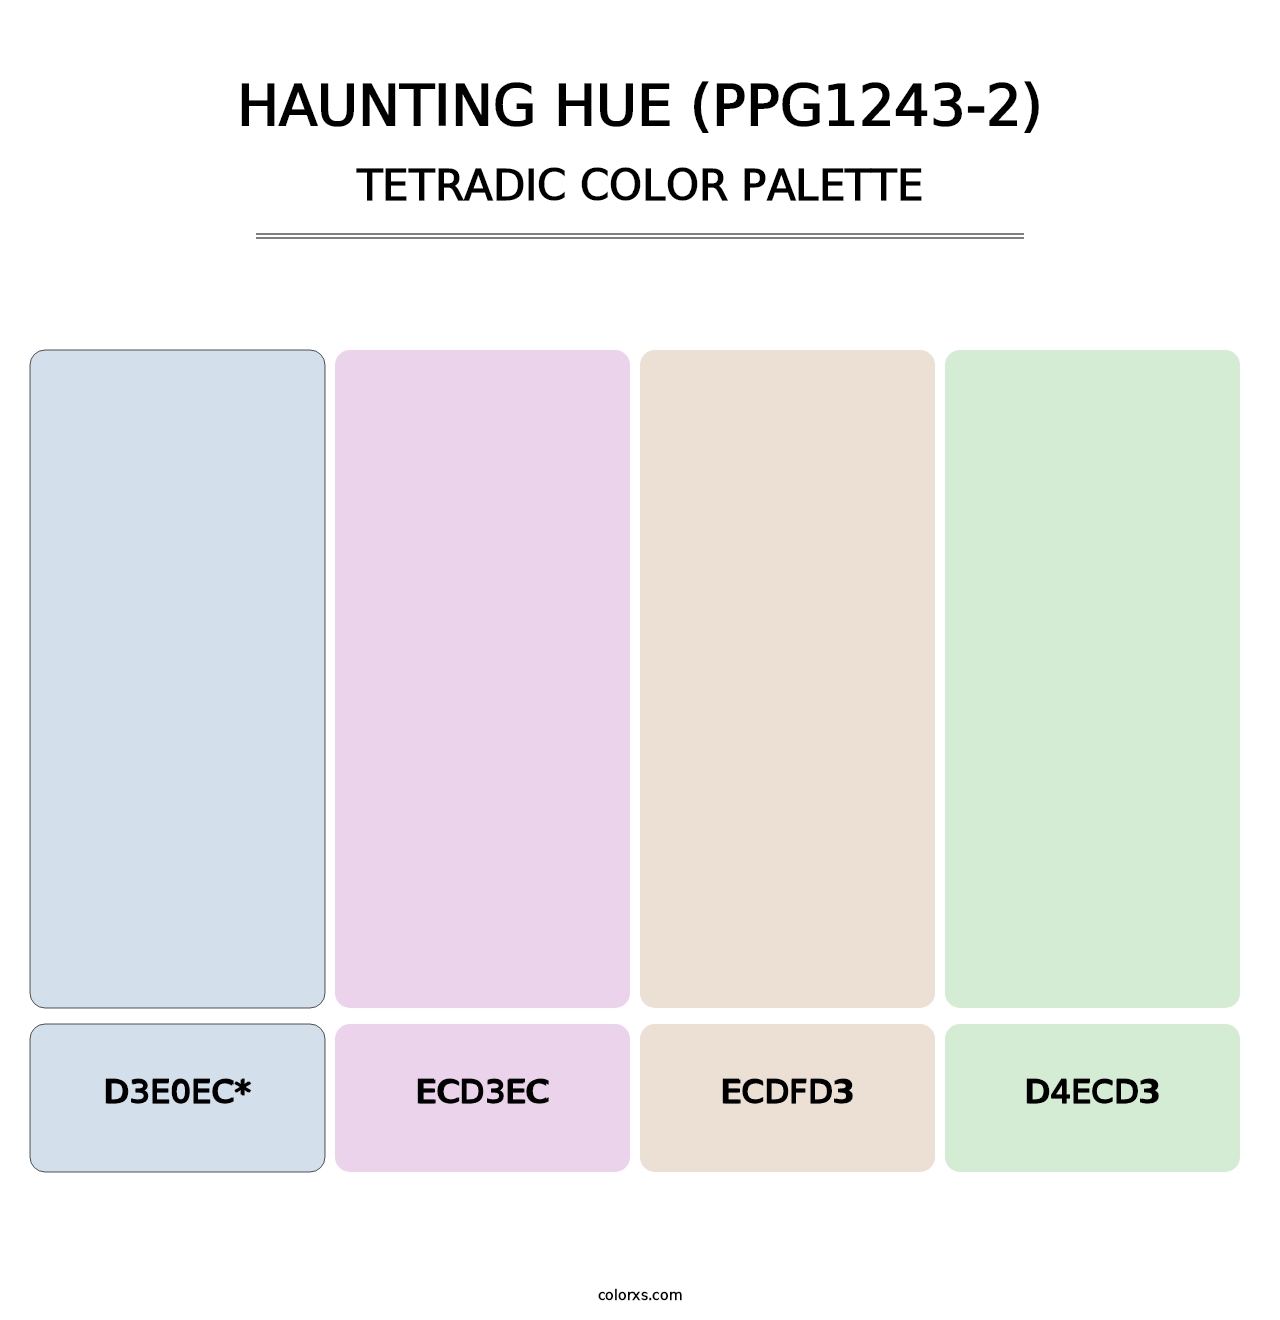 Haunting Hue (PPG1243-2) - Tetradic Color Palette